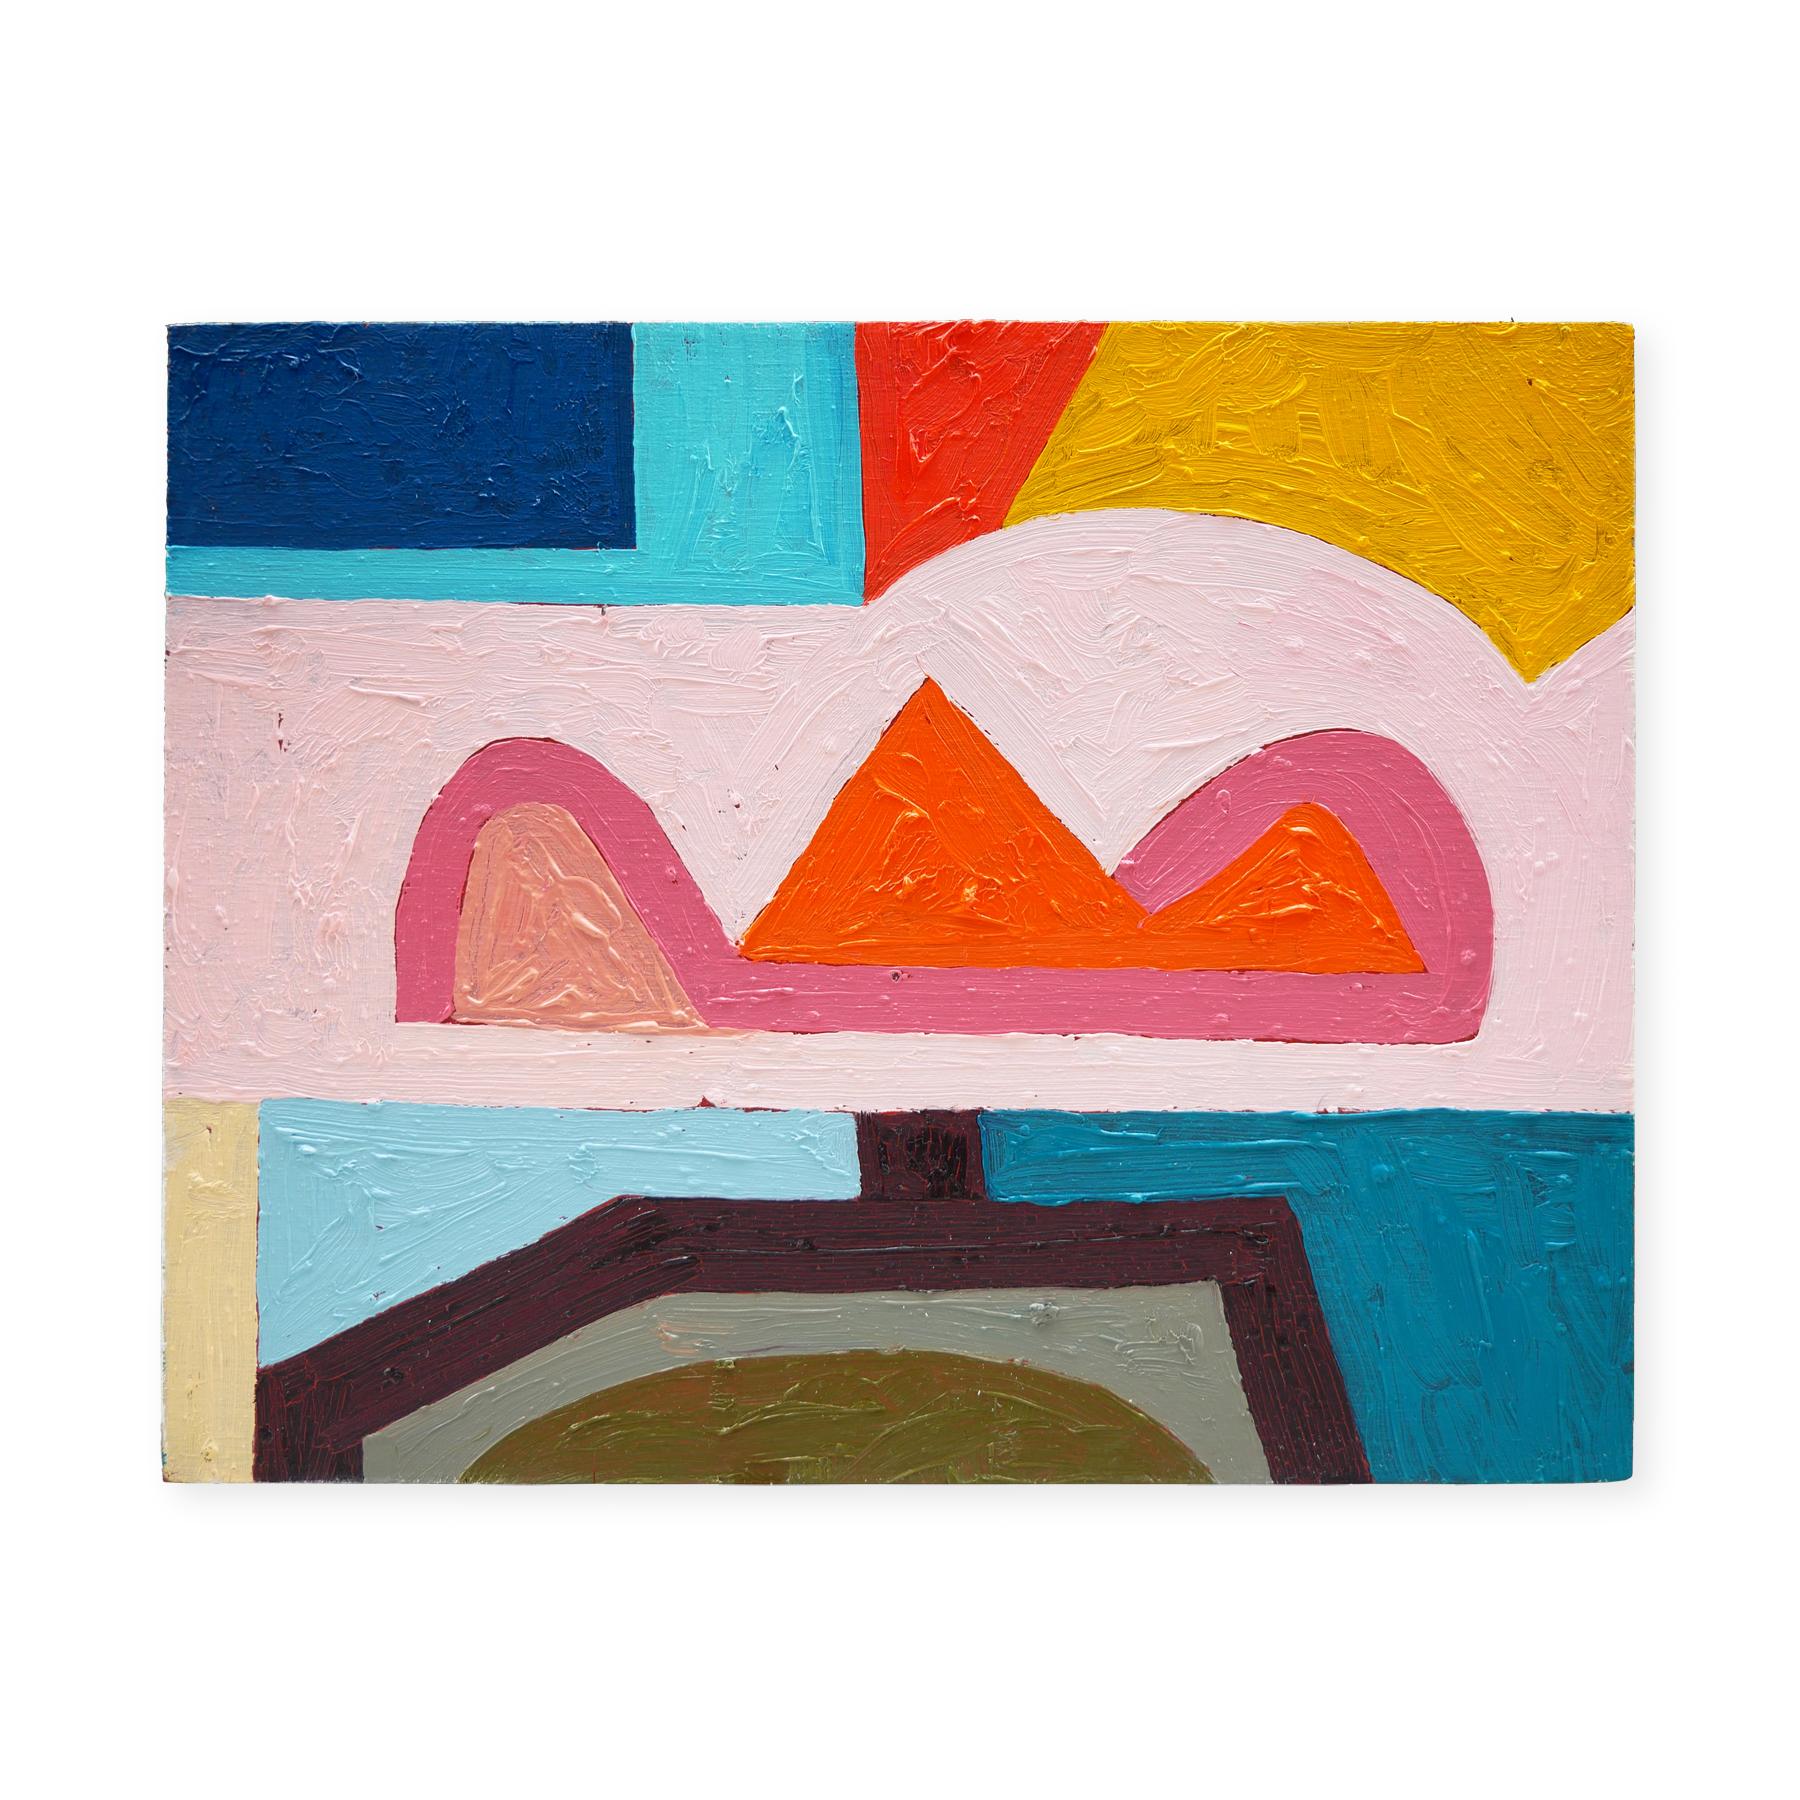 Pastel blue, pink, yellow, and red abstract contemporary painting by Houston, TX artist Peter Healy. The piece depicts geometric shapes that resembled naturalistic figures such as mountains and clouds. This painting was included in the 2022 group